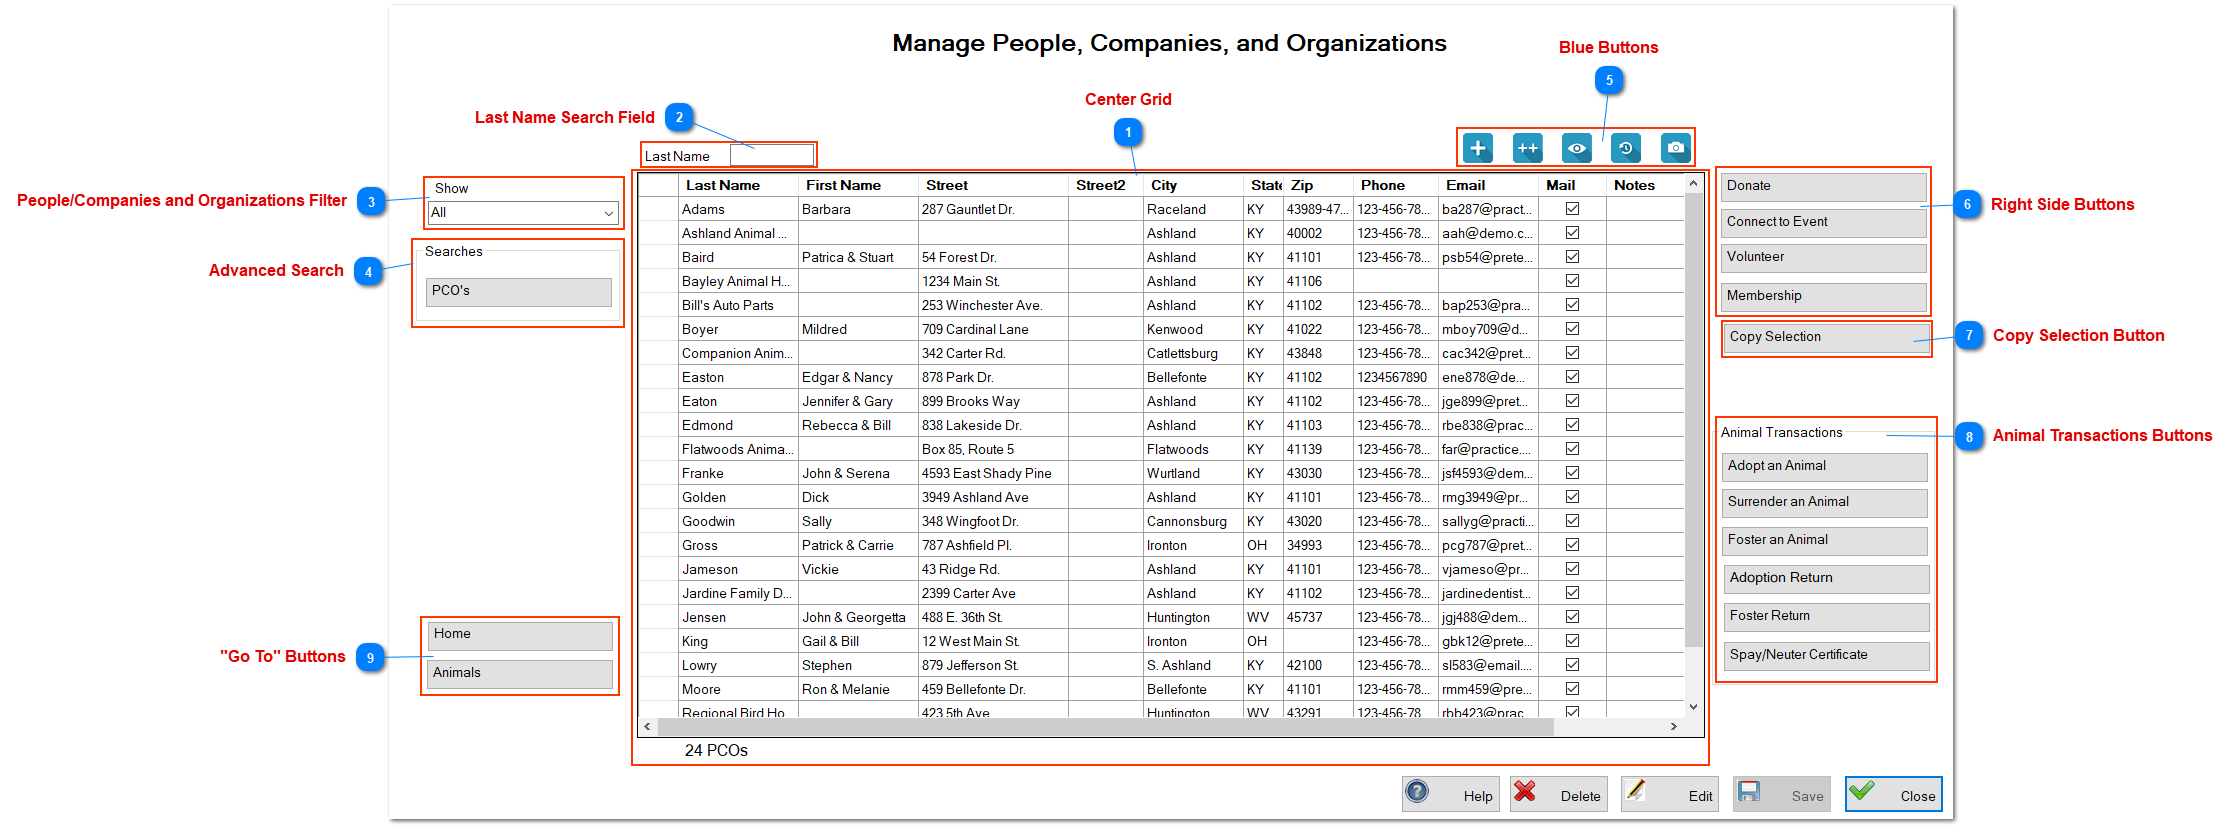 Exploring the Manage People, Companies, and Organizations Screen